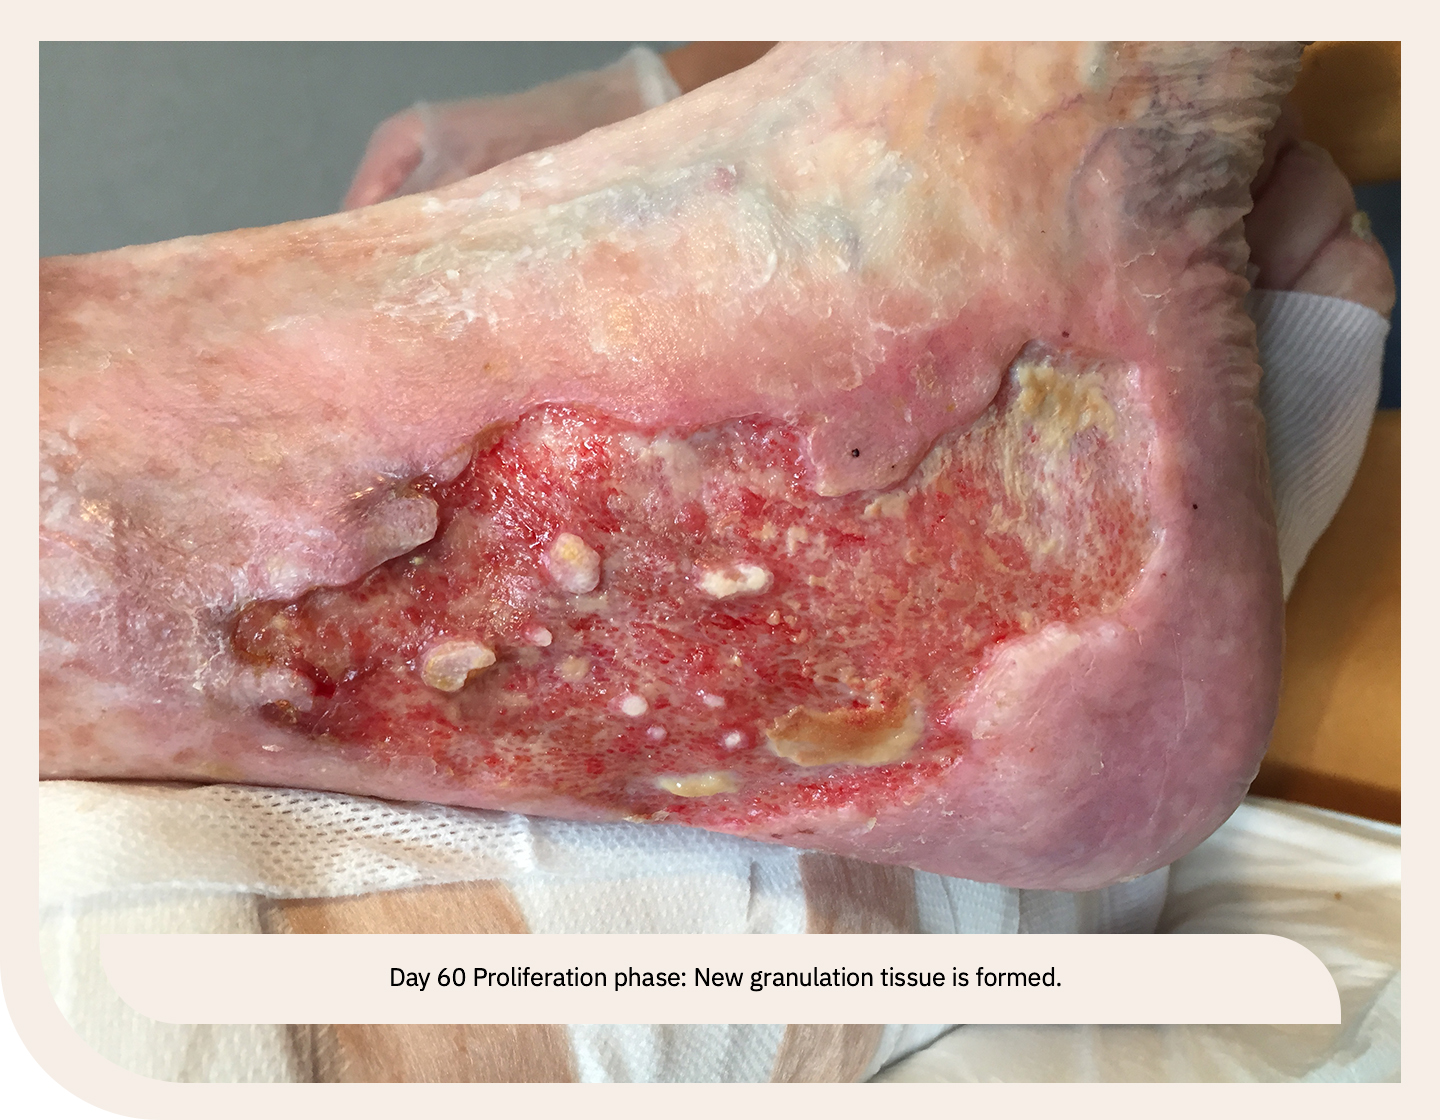 leg ulcer wound in proliferation phase